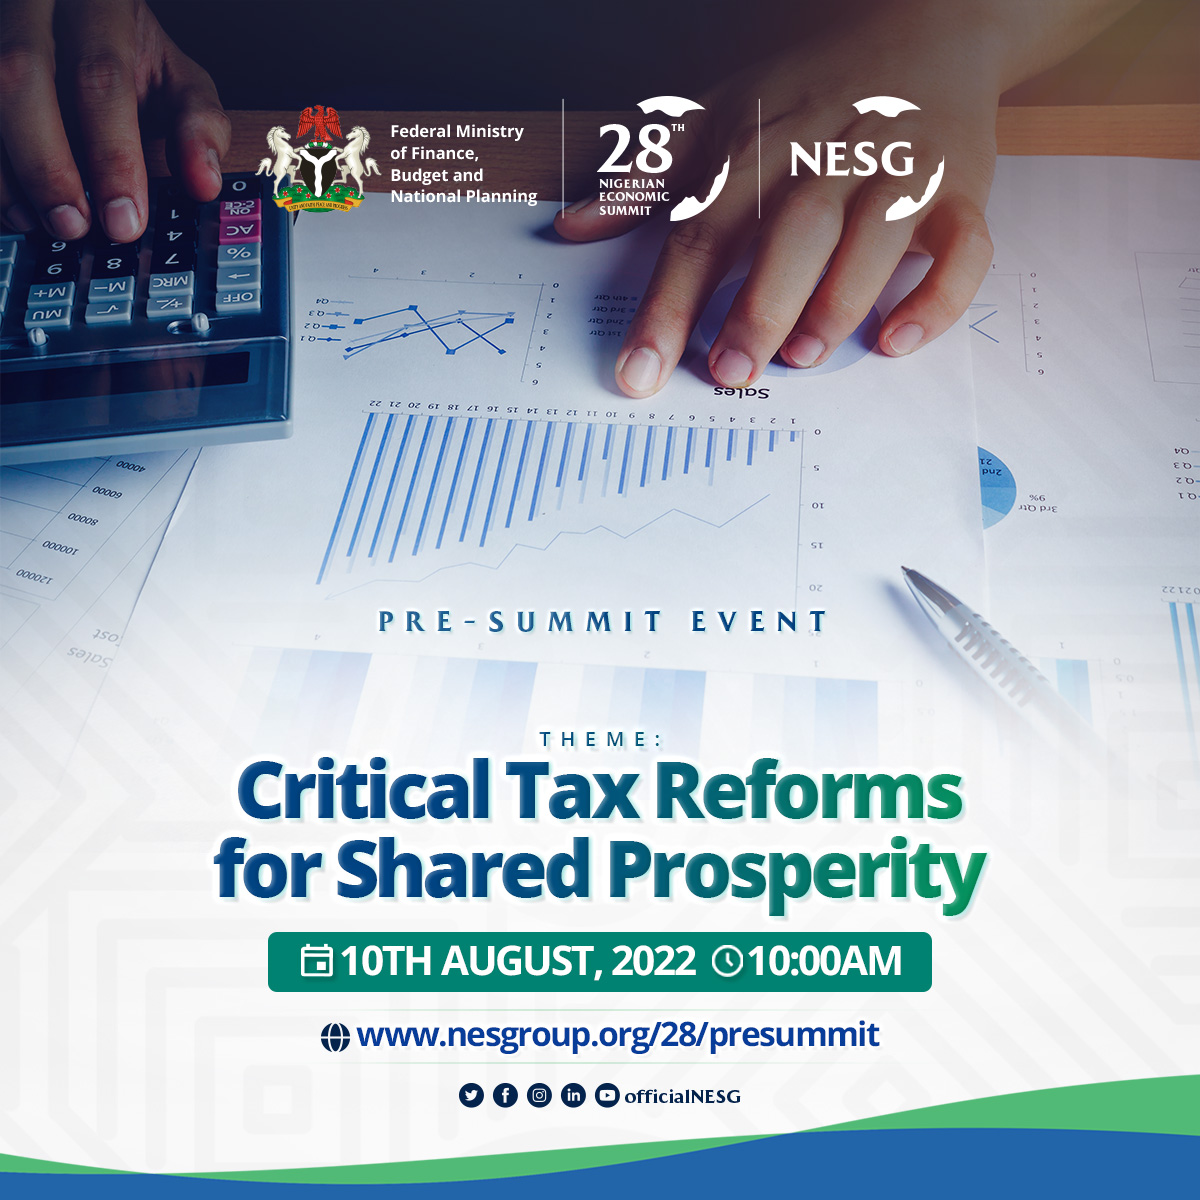 #NES28 Presummit Event: Critical Tax Reforms for Shared Prosperity,  The Nigerian Economic Summit Group